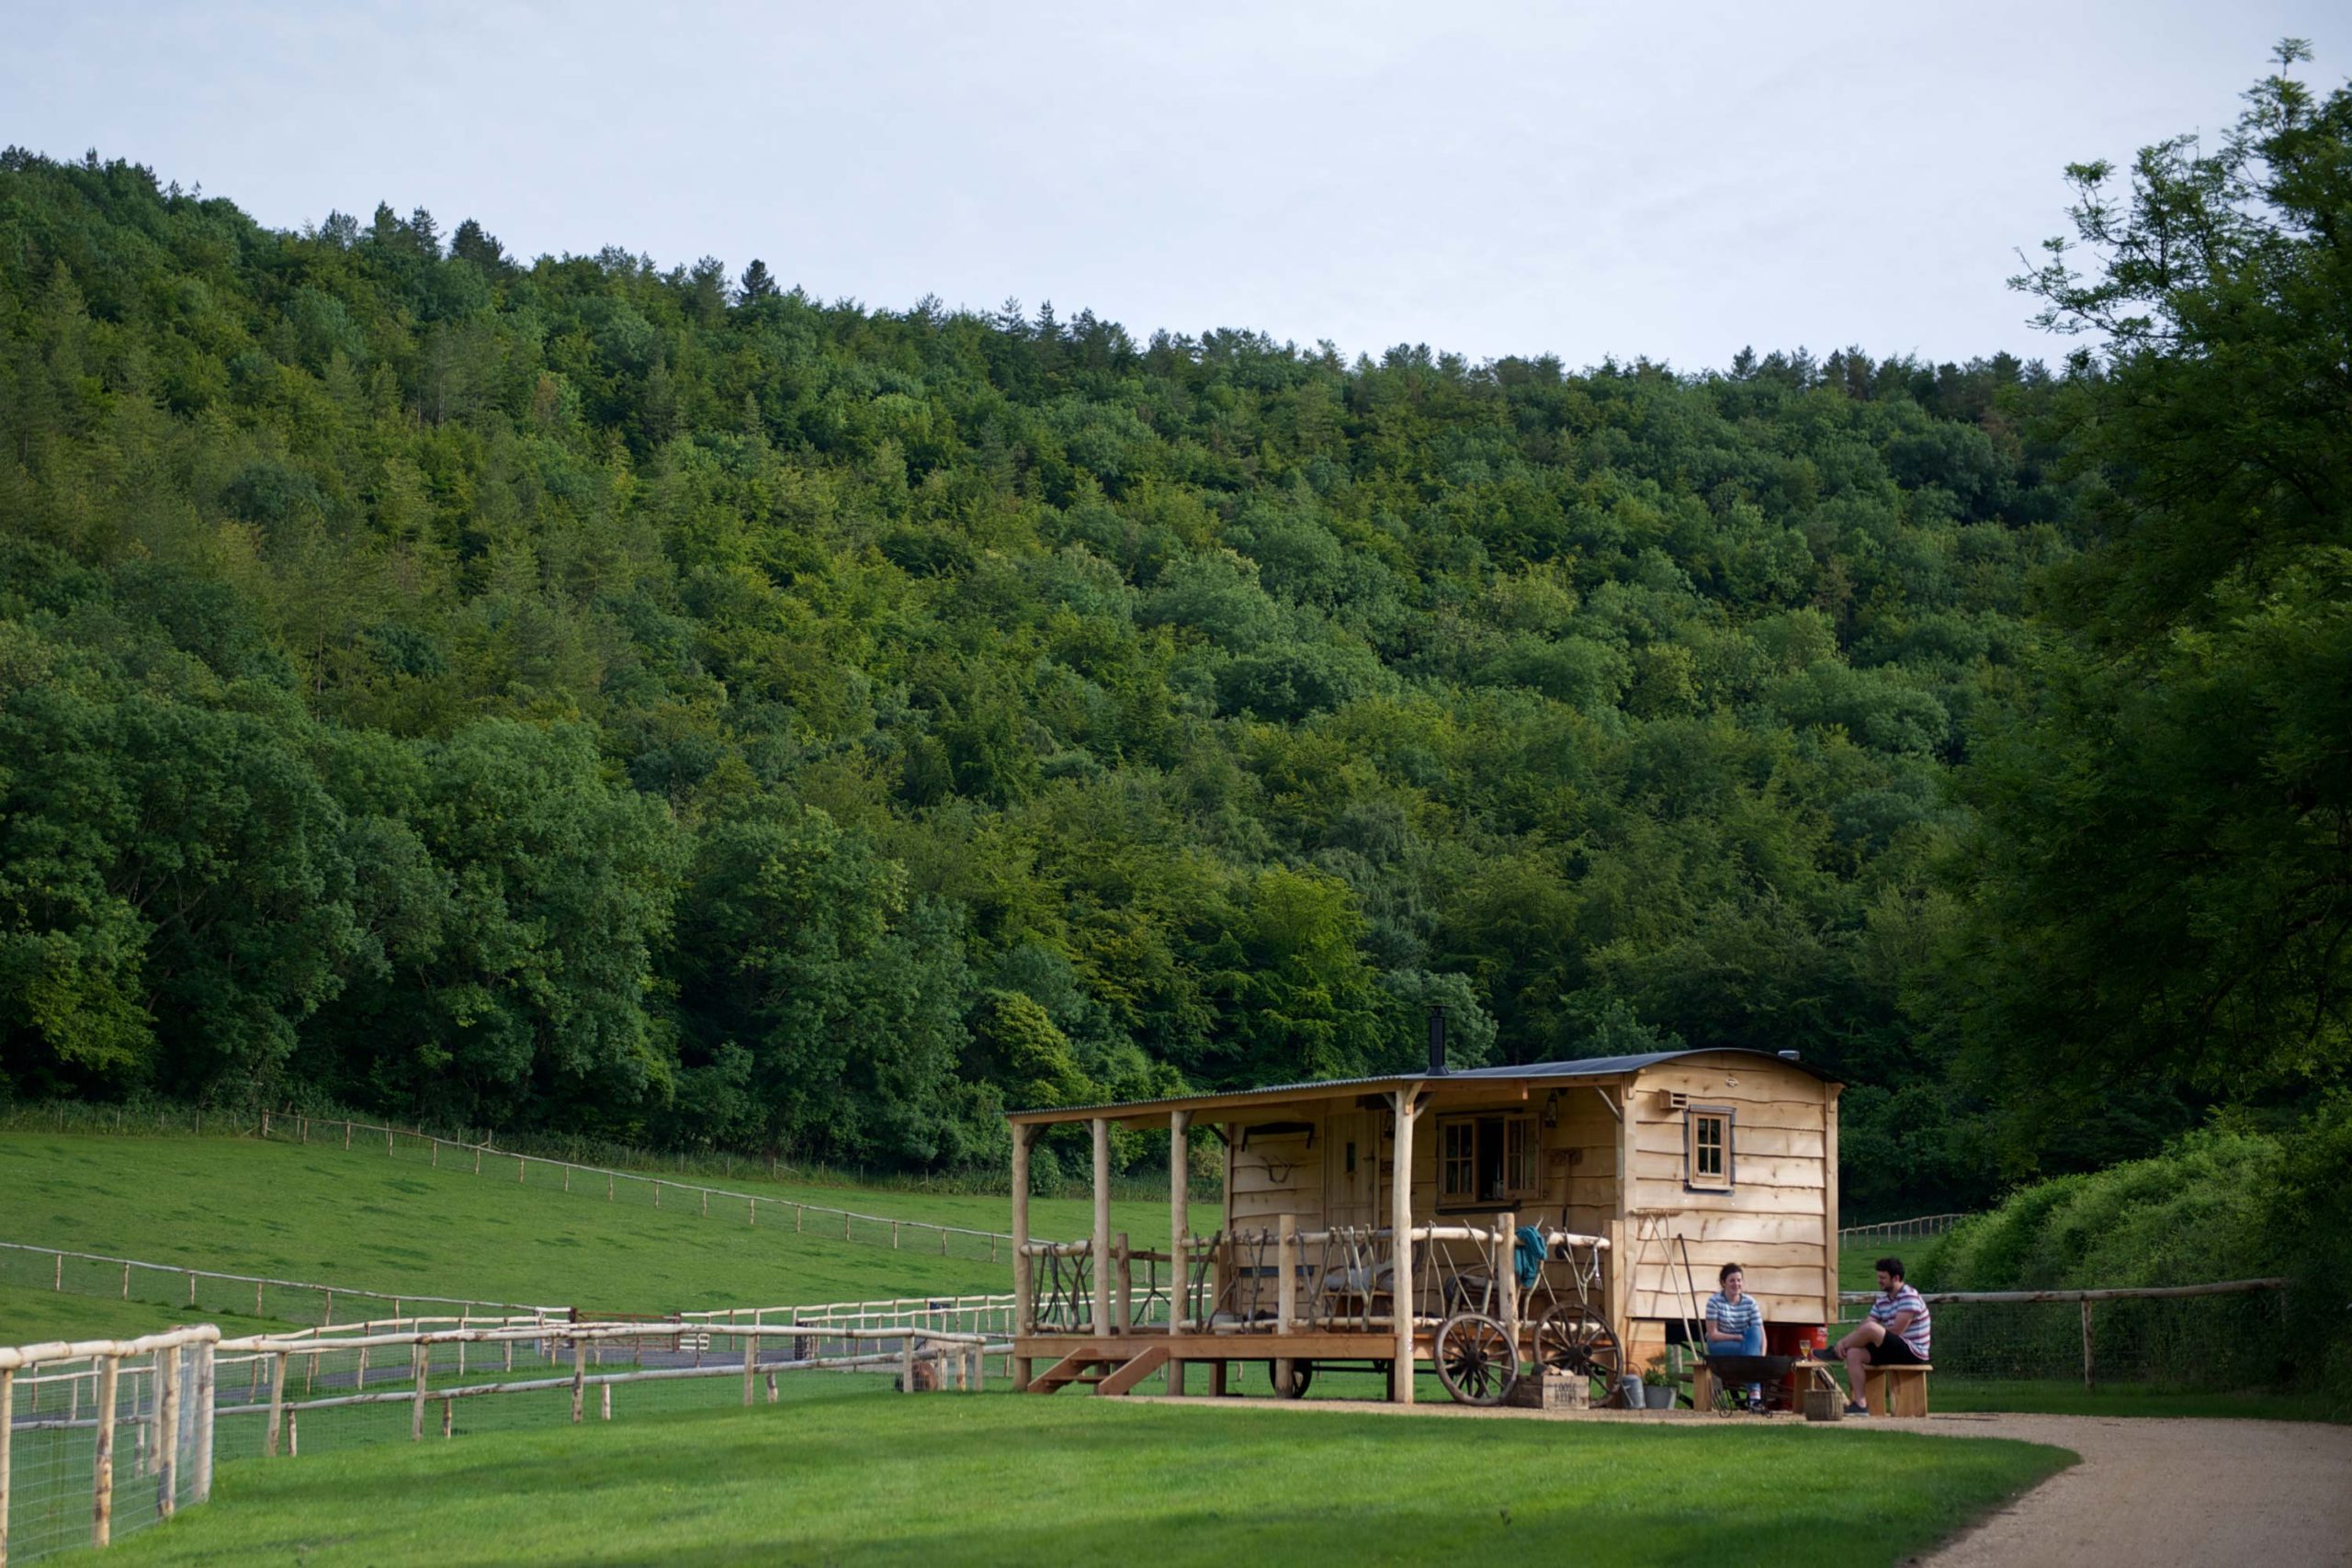 A couple sitting outside one of the cabins at Loose Reins with a lush woodland in the background